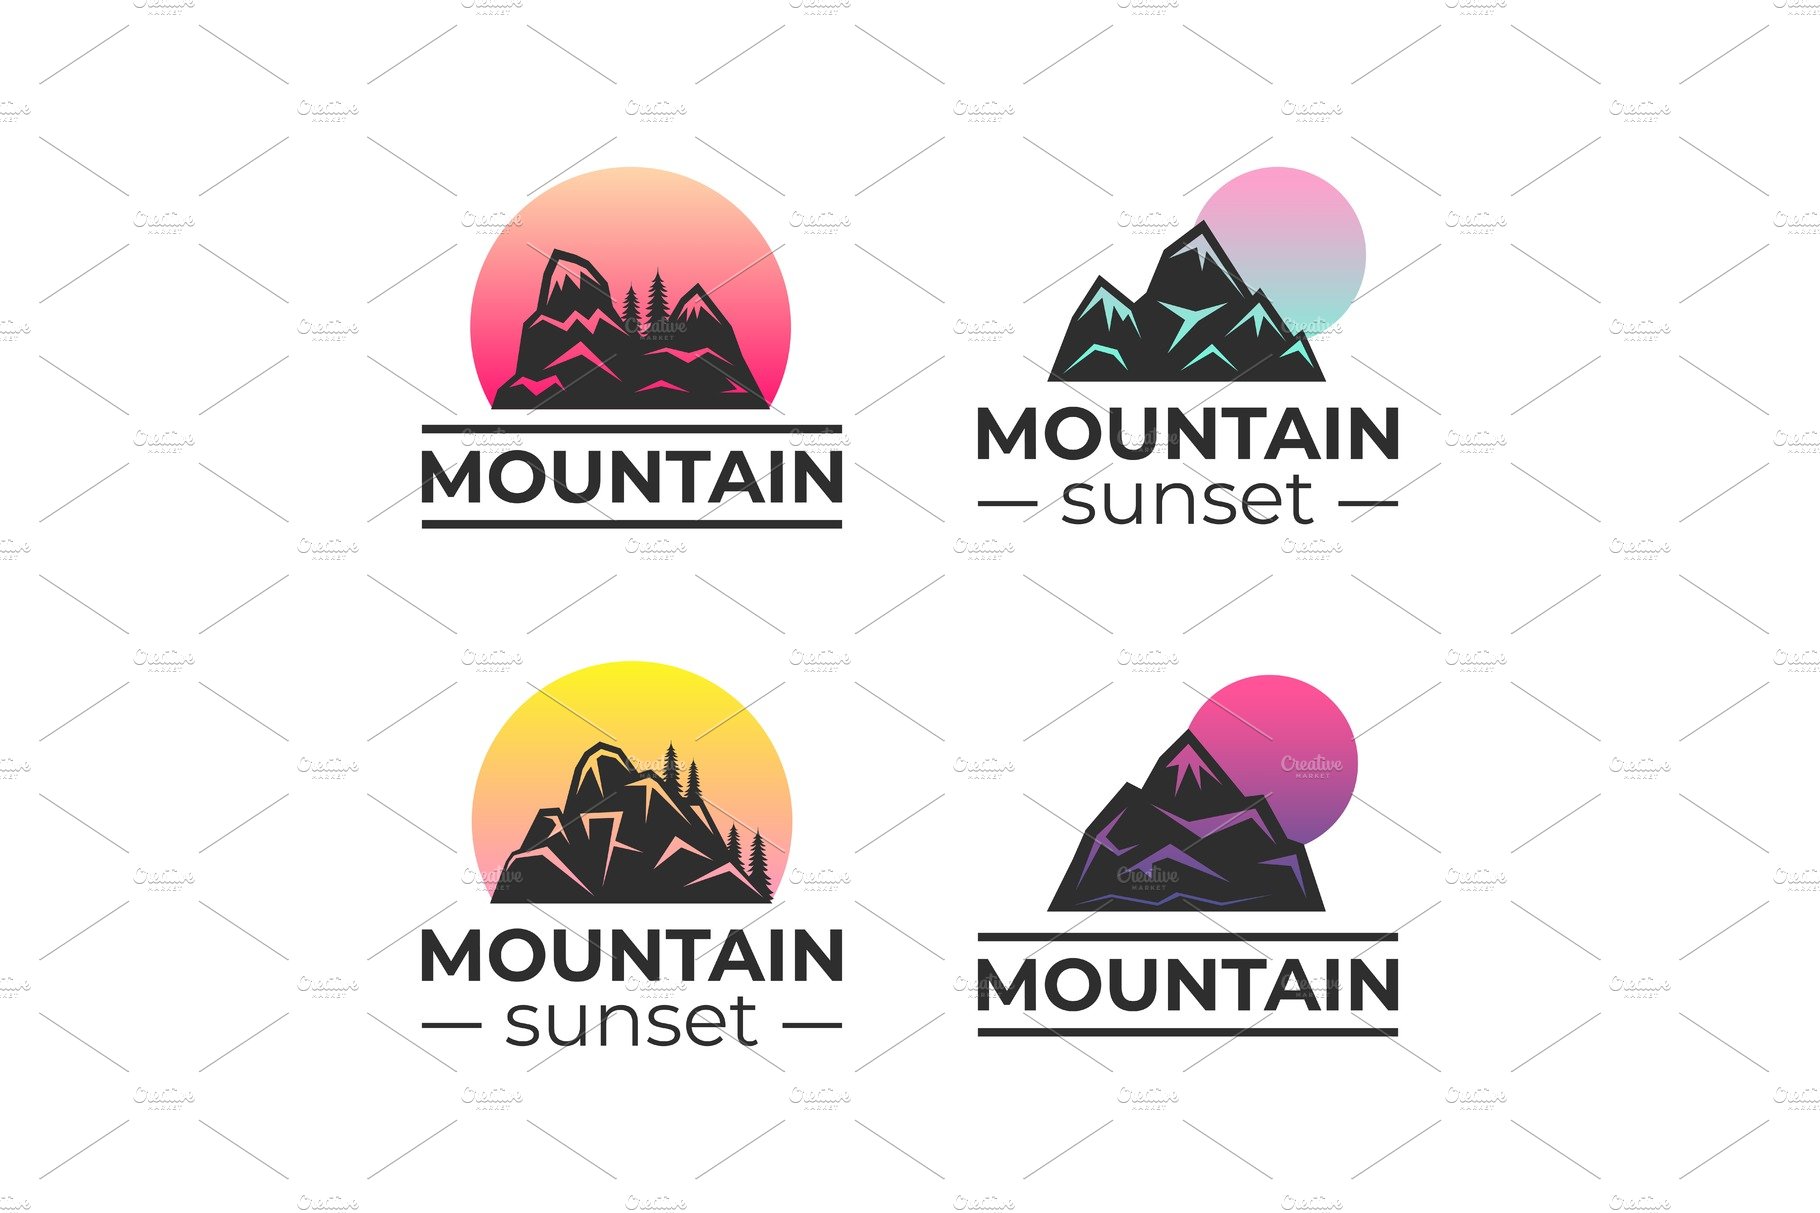 Mountain sunset vector illustration cover image.